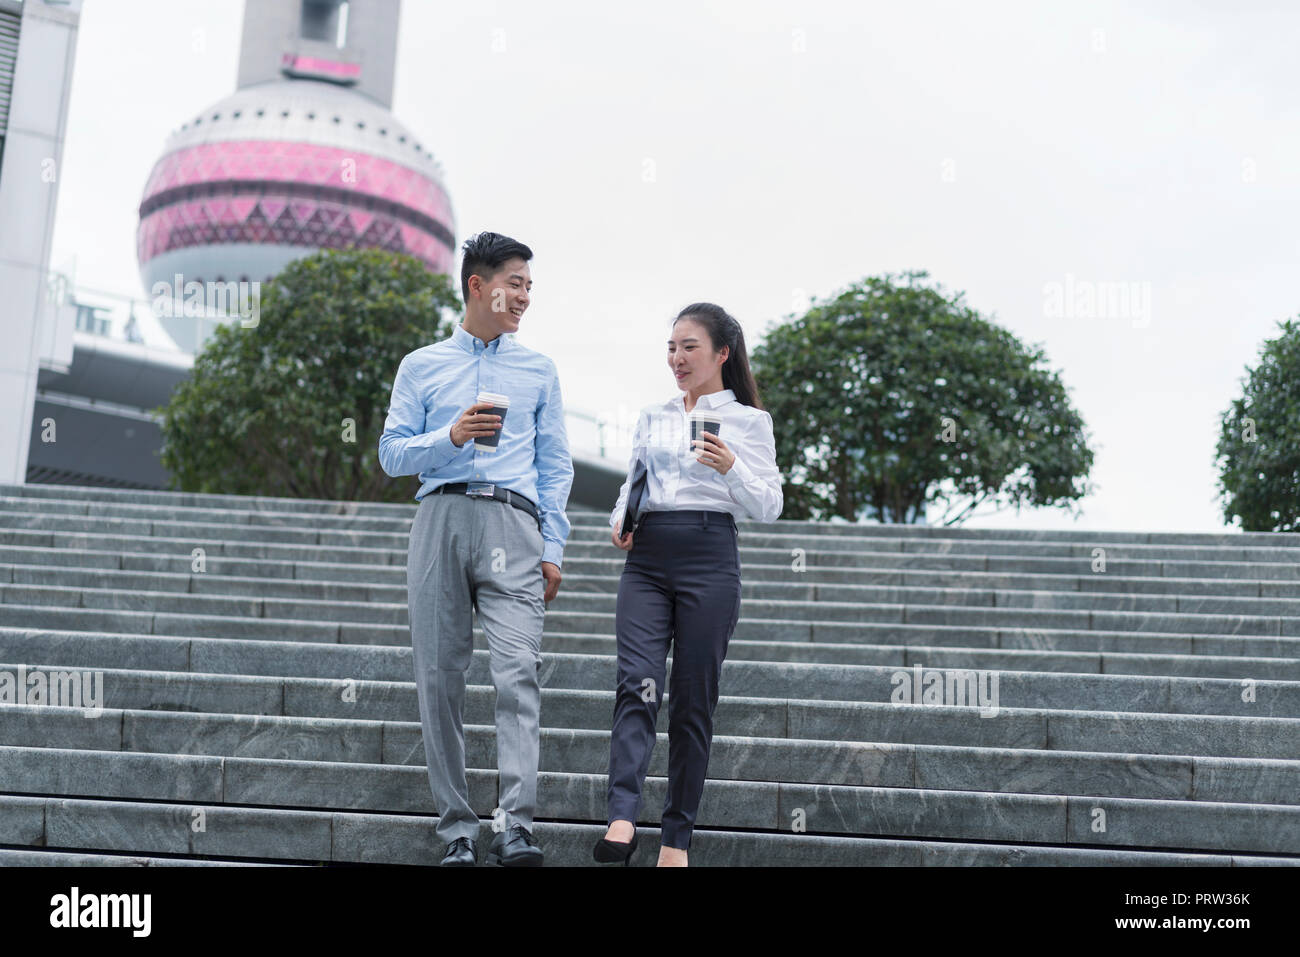 Young businesswoman and man with takeaway coffee moving down city stairway, Shanghai, China Stock Photo